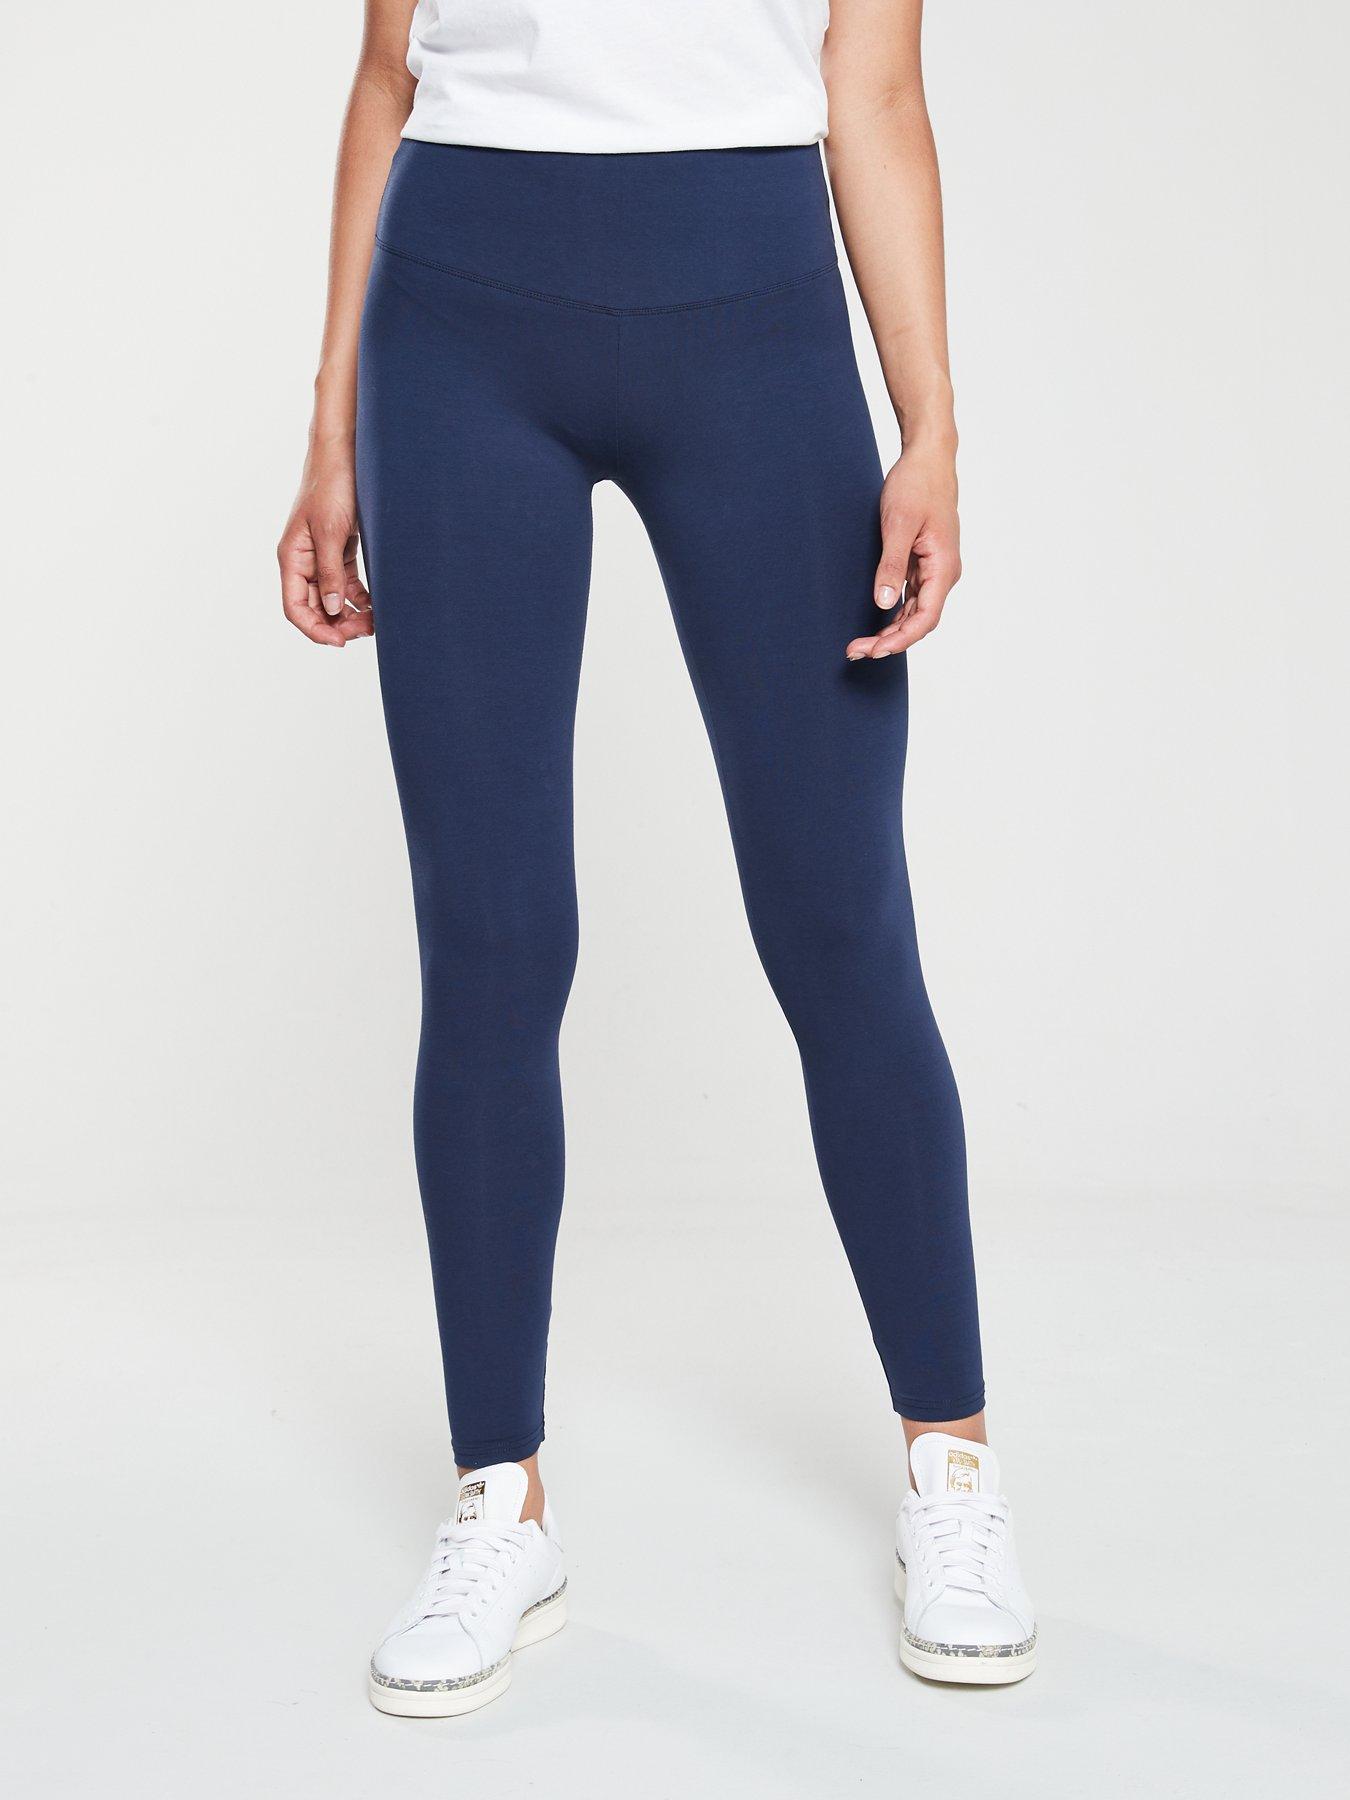 V by Very Confident Curve Legging - Navy | very.co.uk